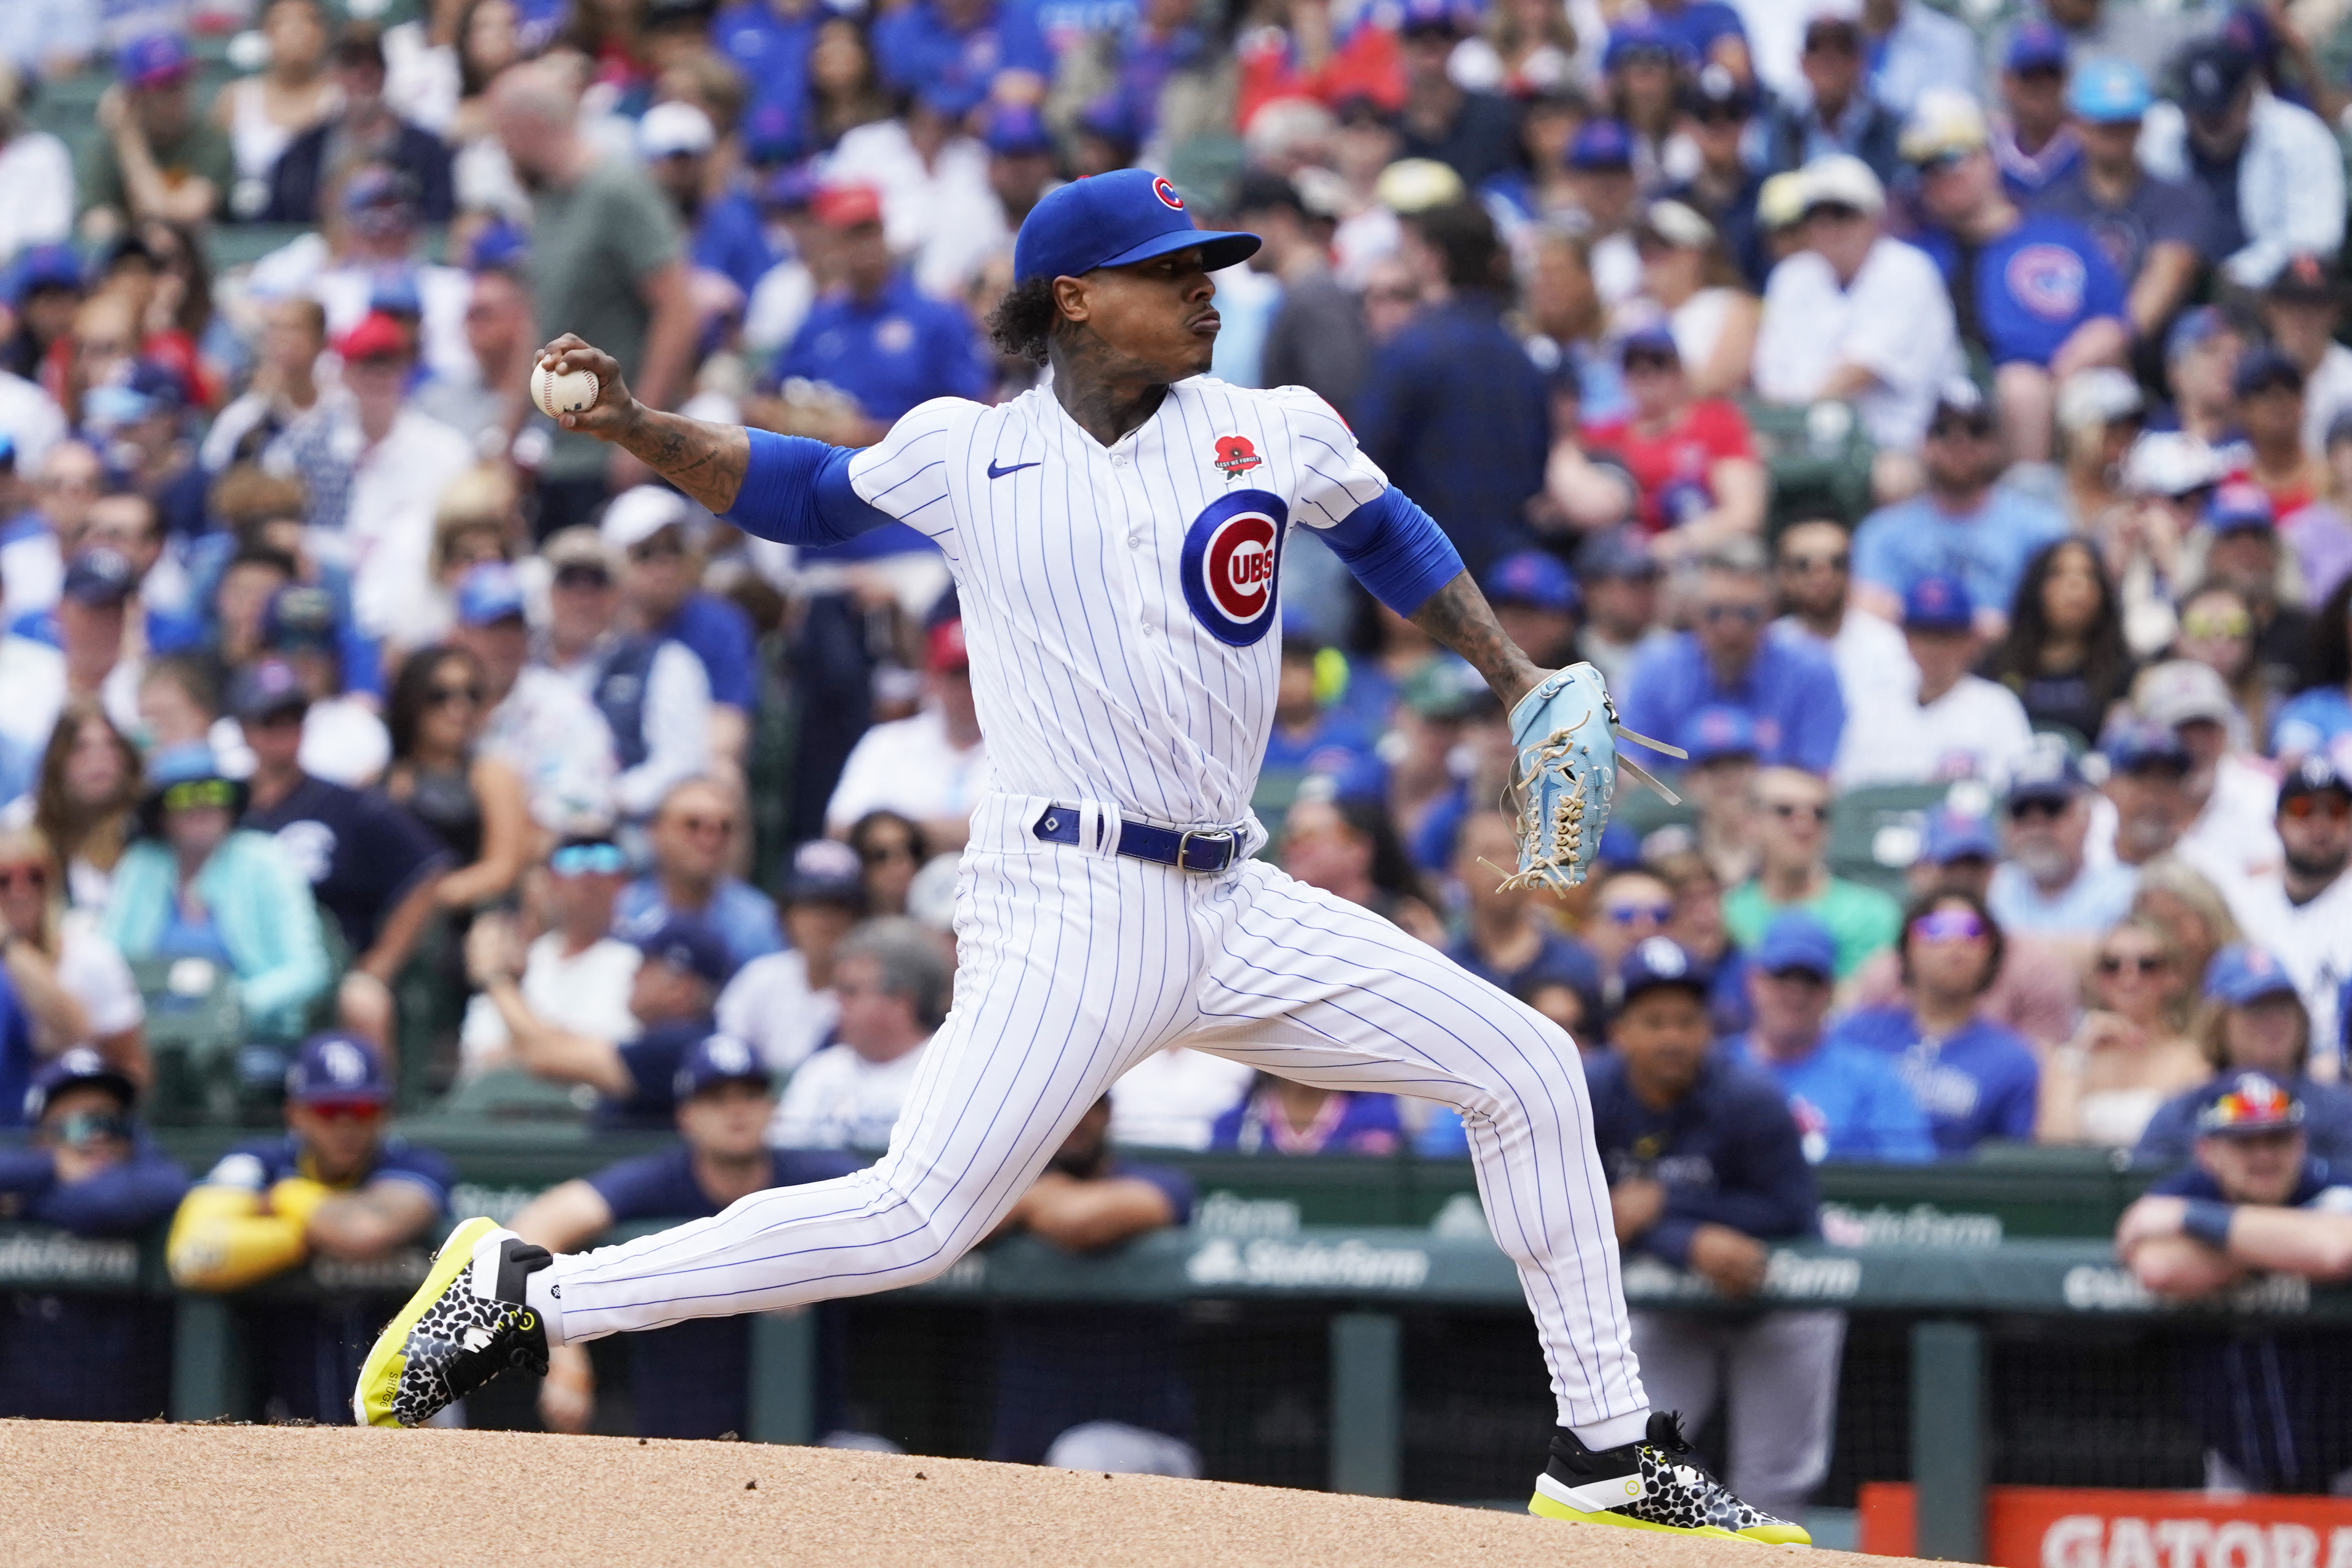 Cubs 1, Rays 0: Marcus Stroman's one-hitter was a masterpiece